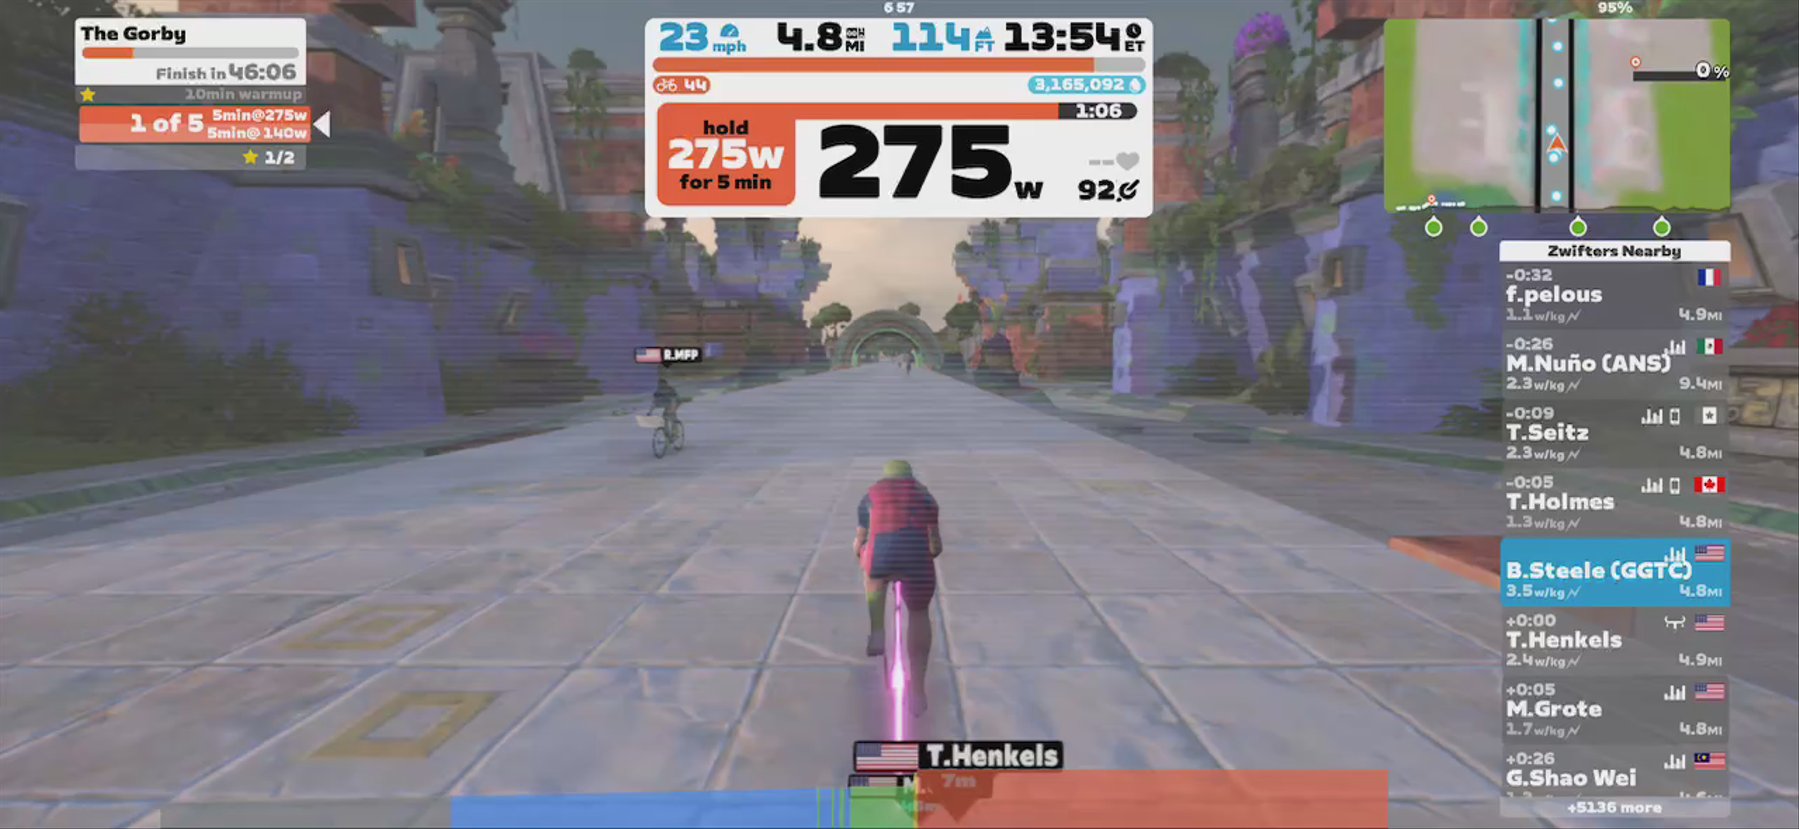 Zwift - The Gorby in Watopia